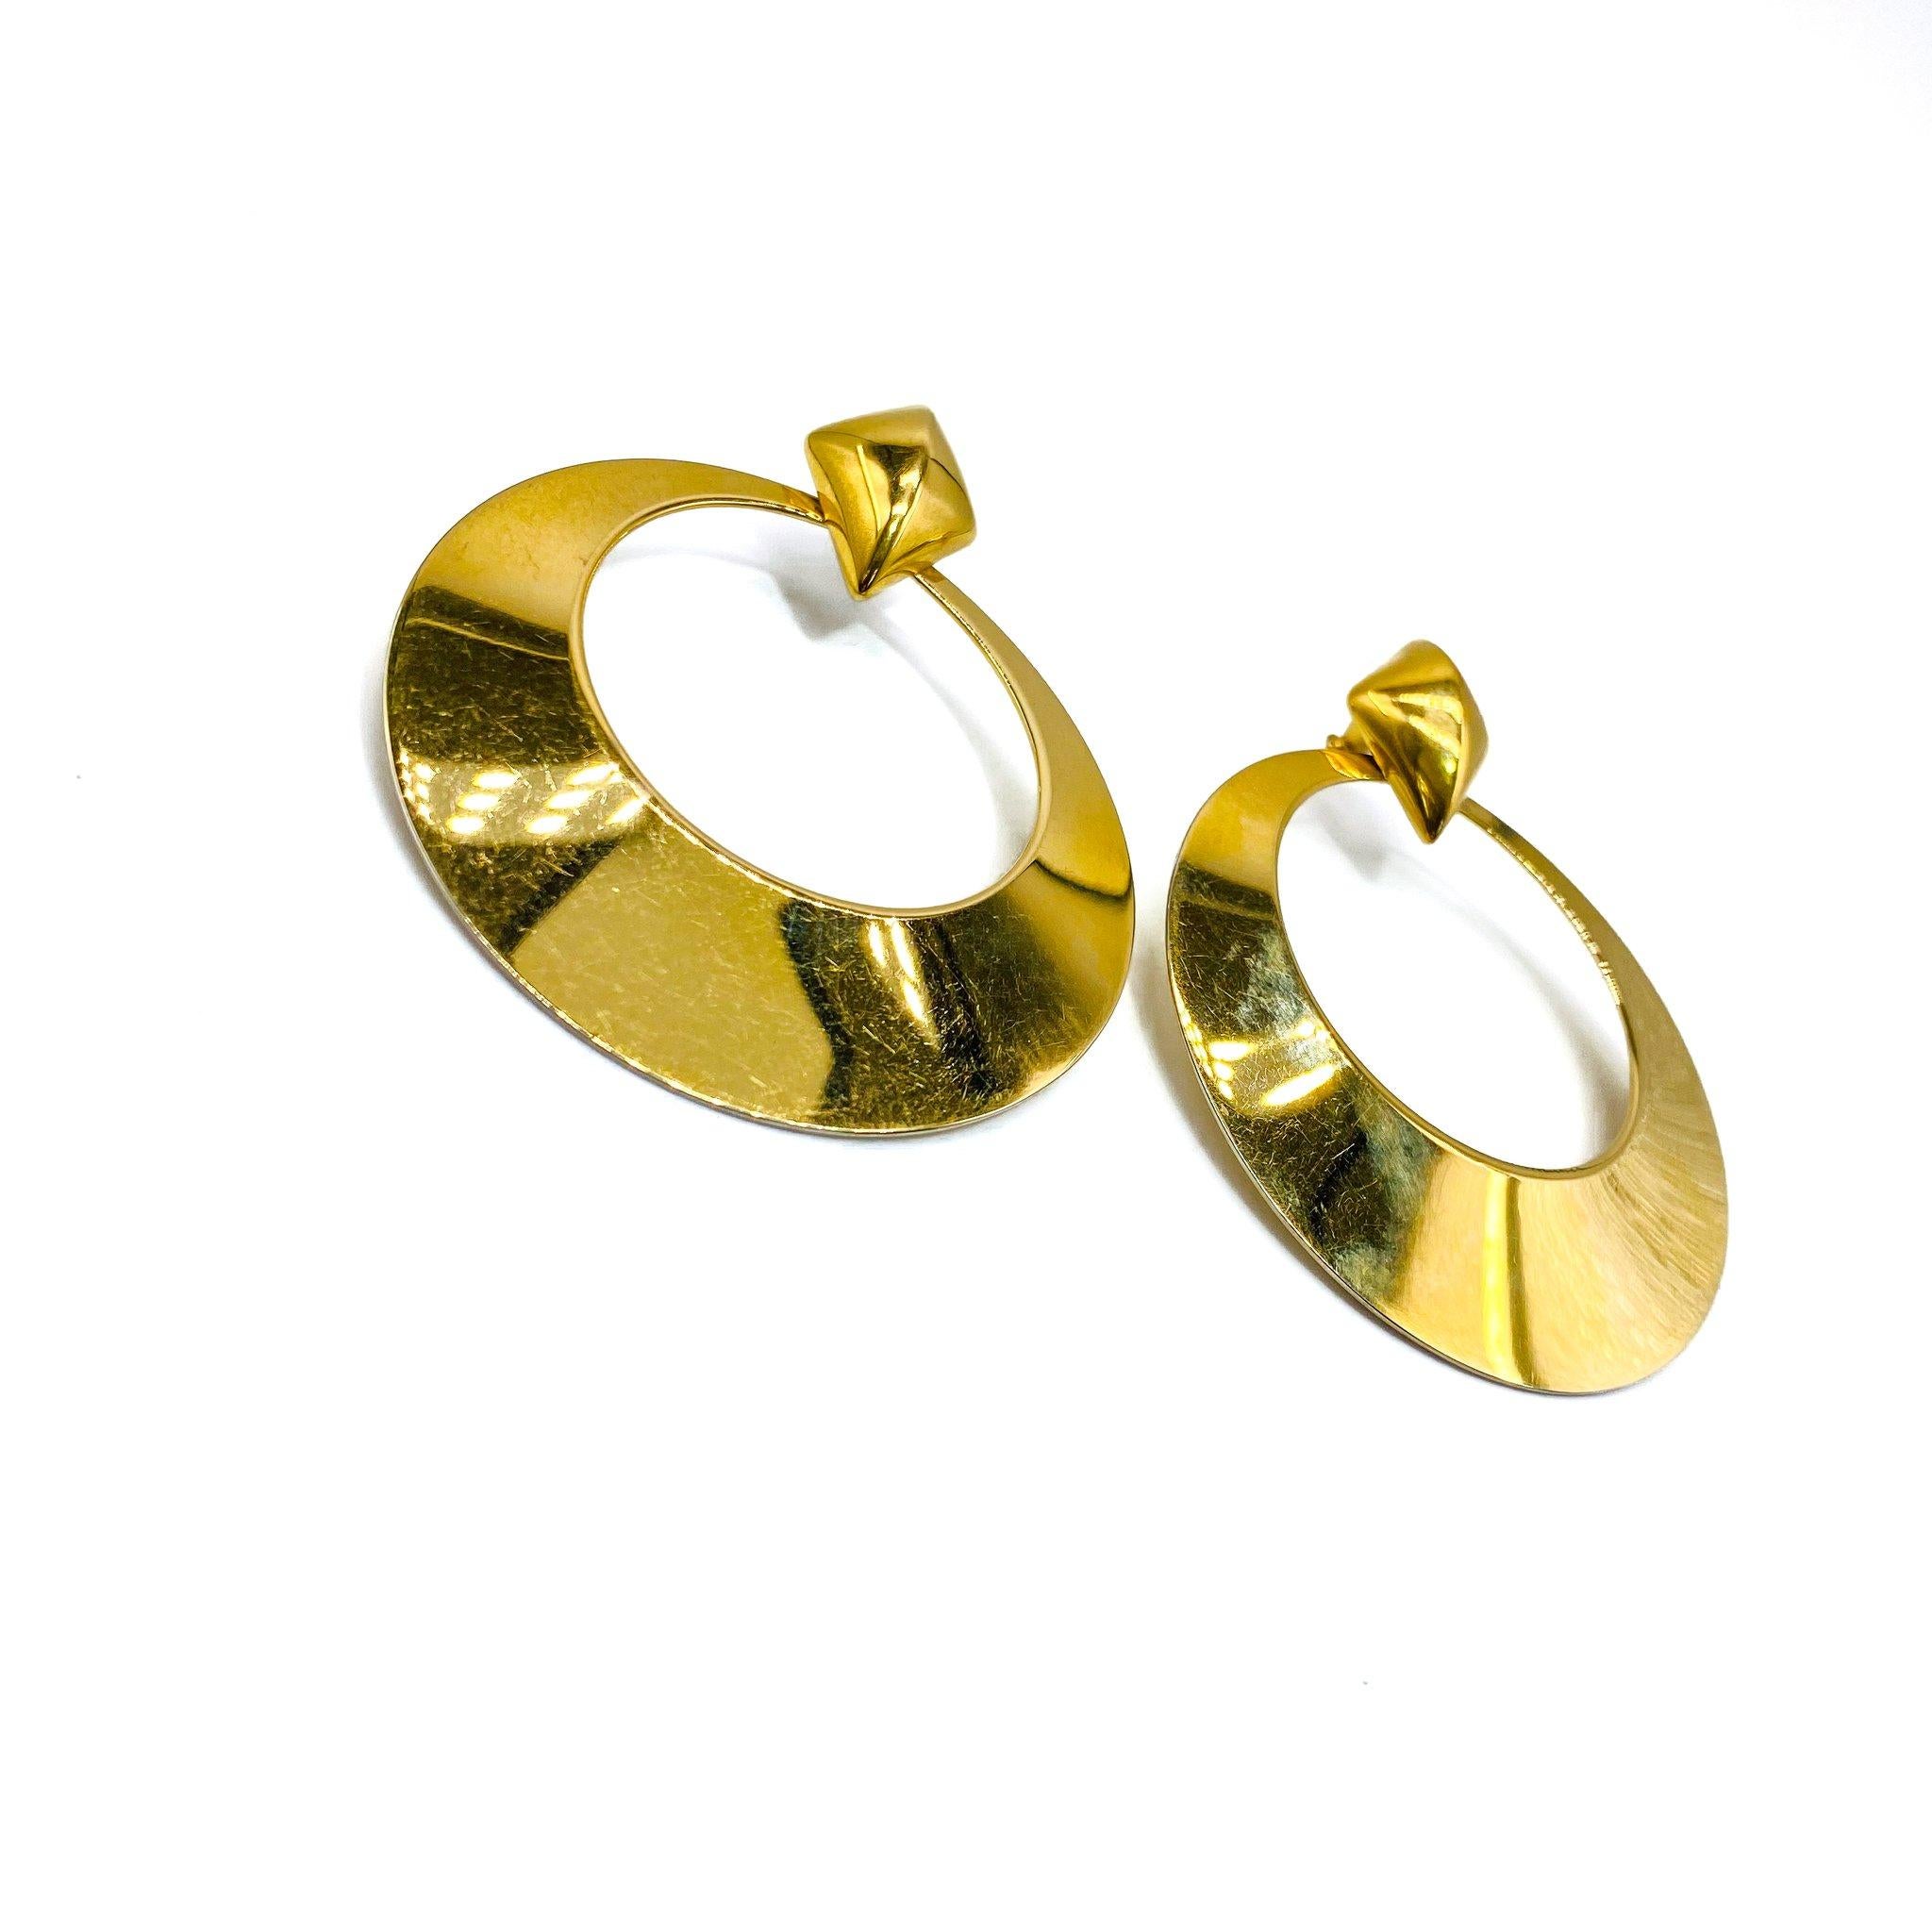 Monet 1980s Vintage Earrings
Amazing statement earrings from Monet, one of the world's most famous costume jewellers
The ultimate statement earrings! Pair with white in summer, black in winter for party season. Add drama to block colour all year